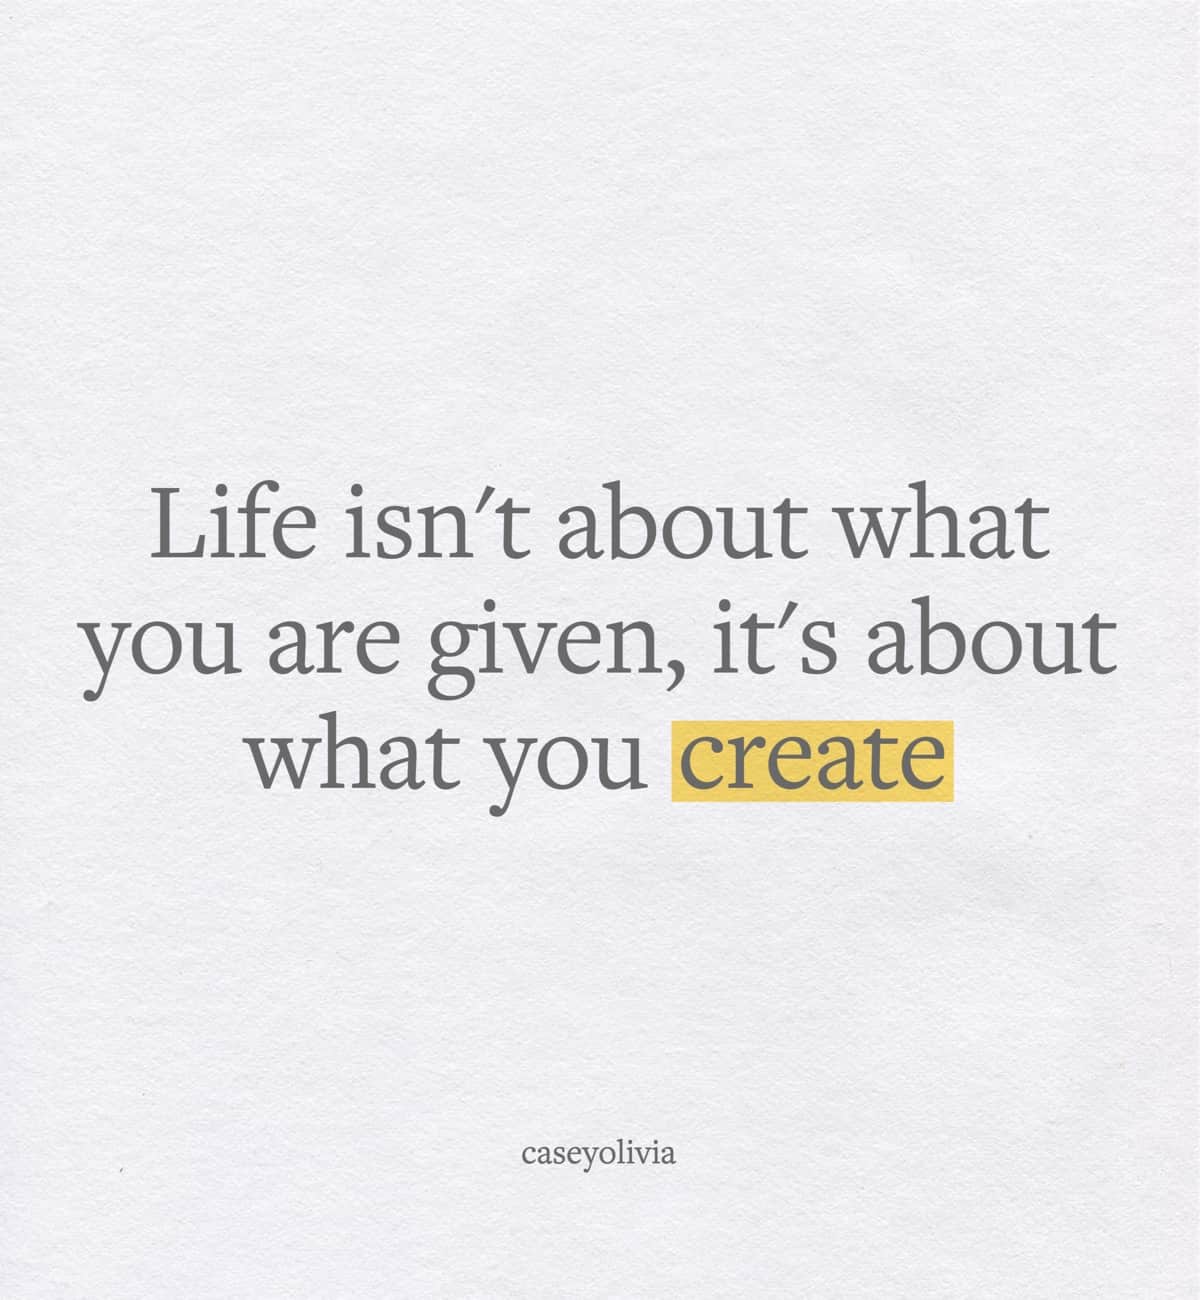 life is about what you create caption